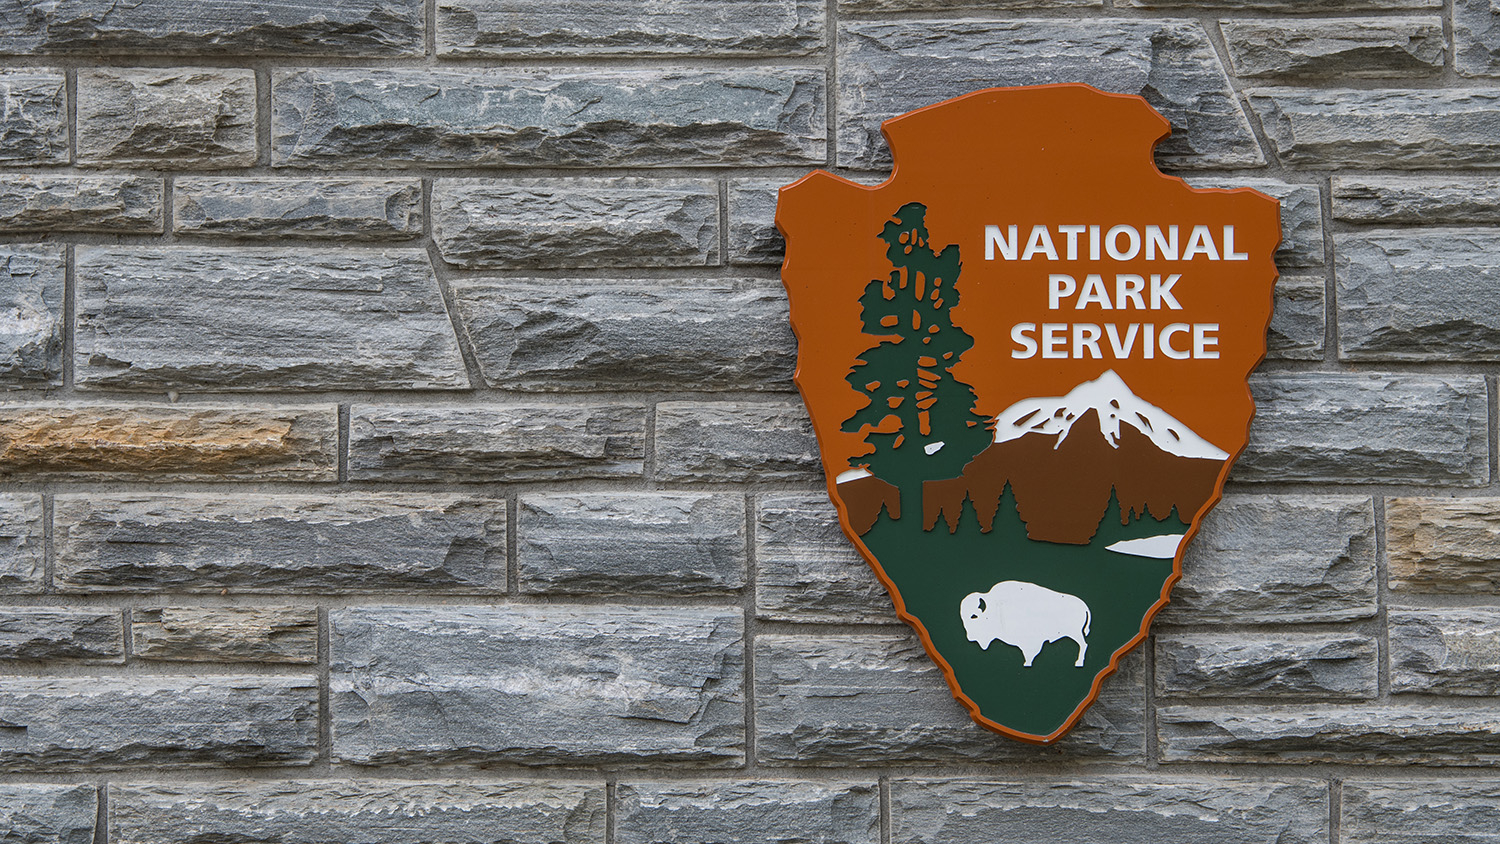 National Park Service sign - New Scholarship Paves Trail for Future Park Rangers - Parks, Recreation and Tourism Management at NC State University